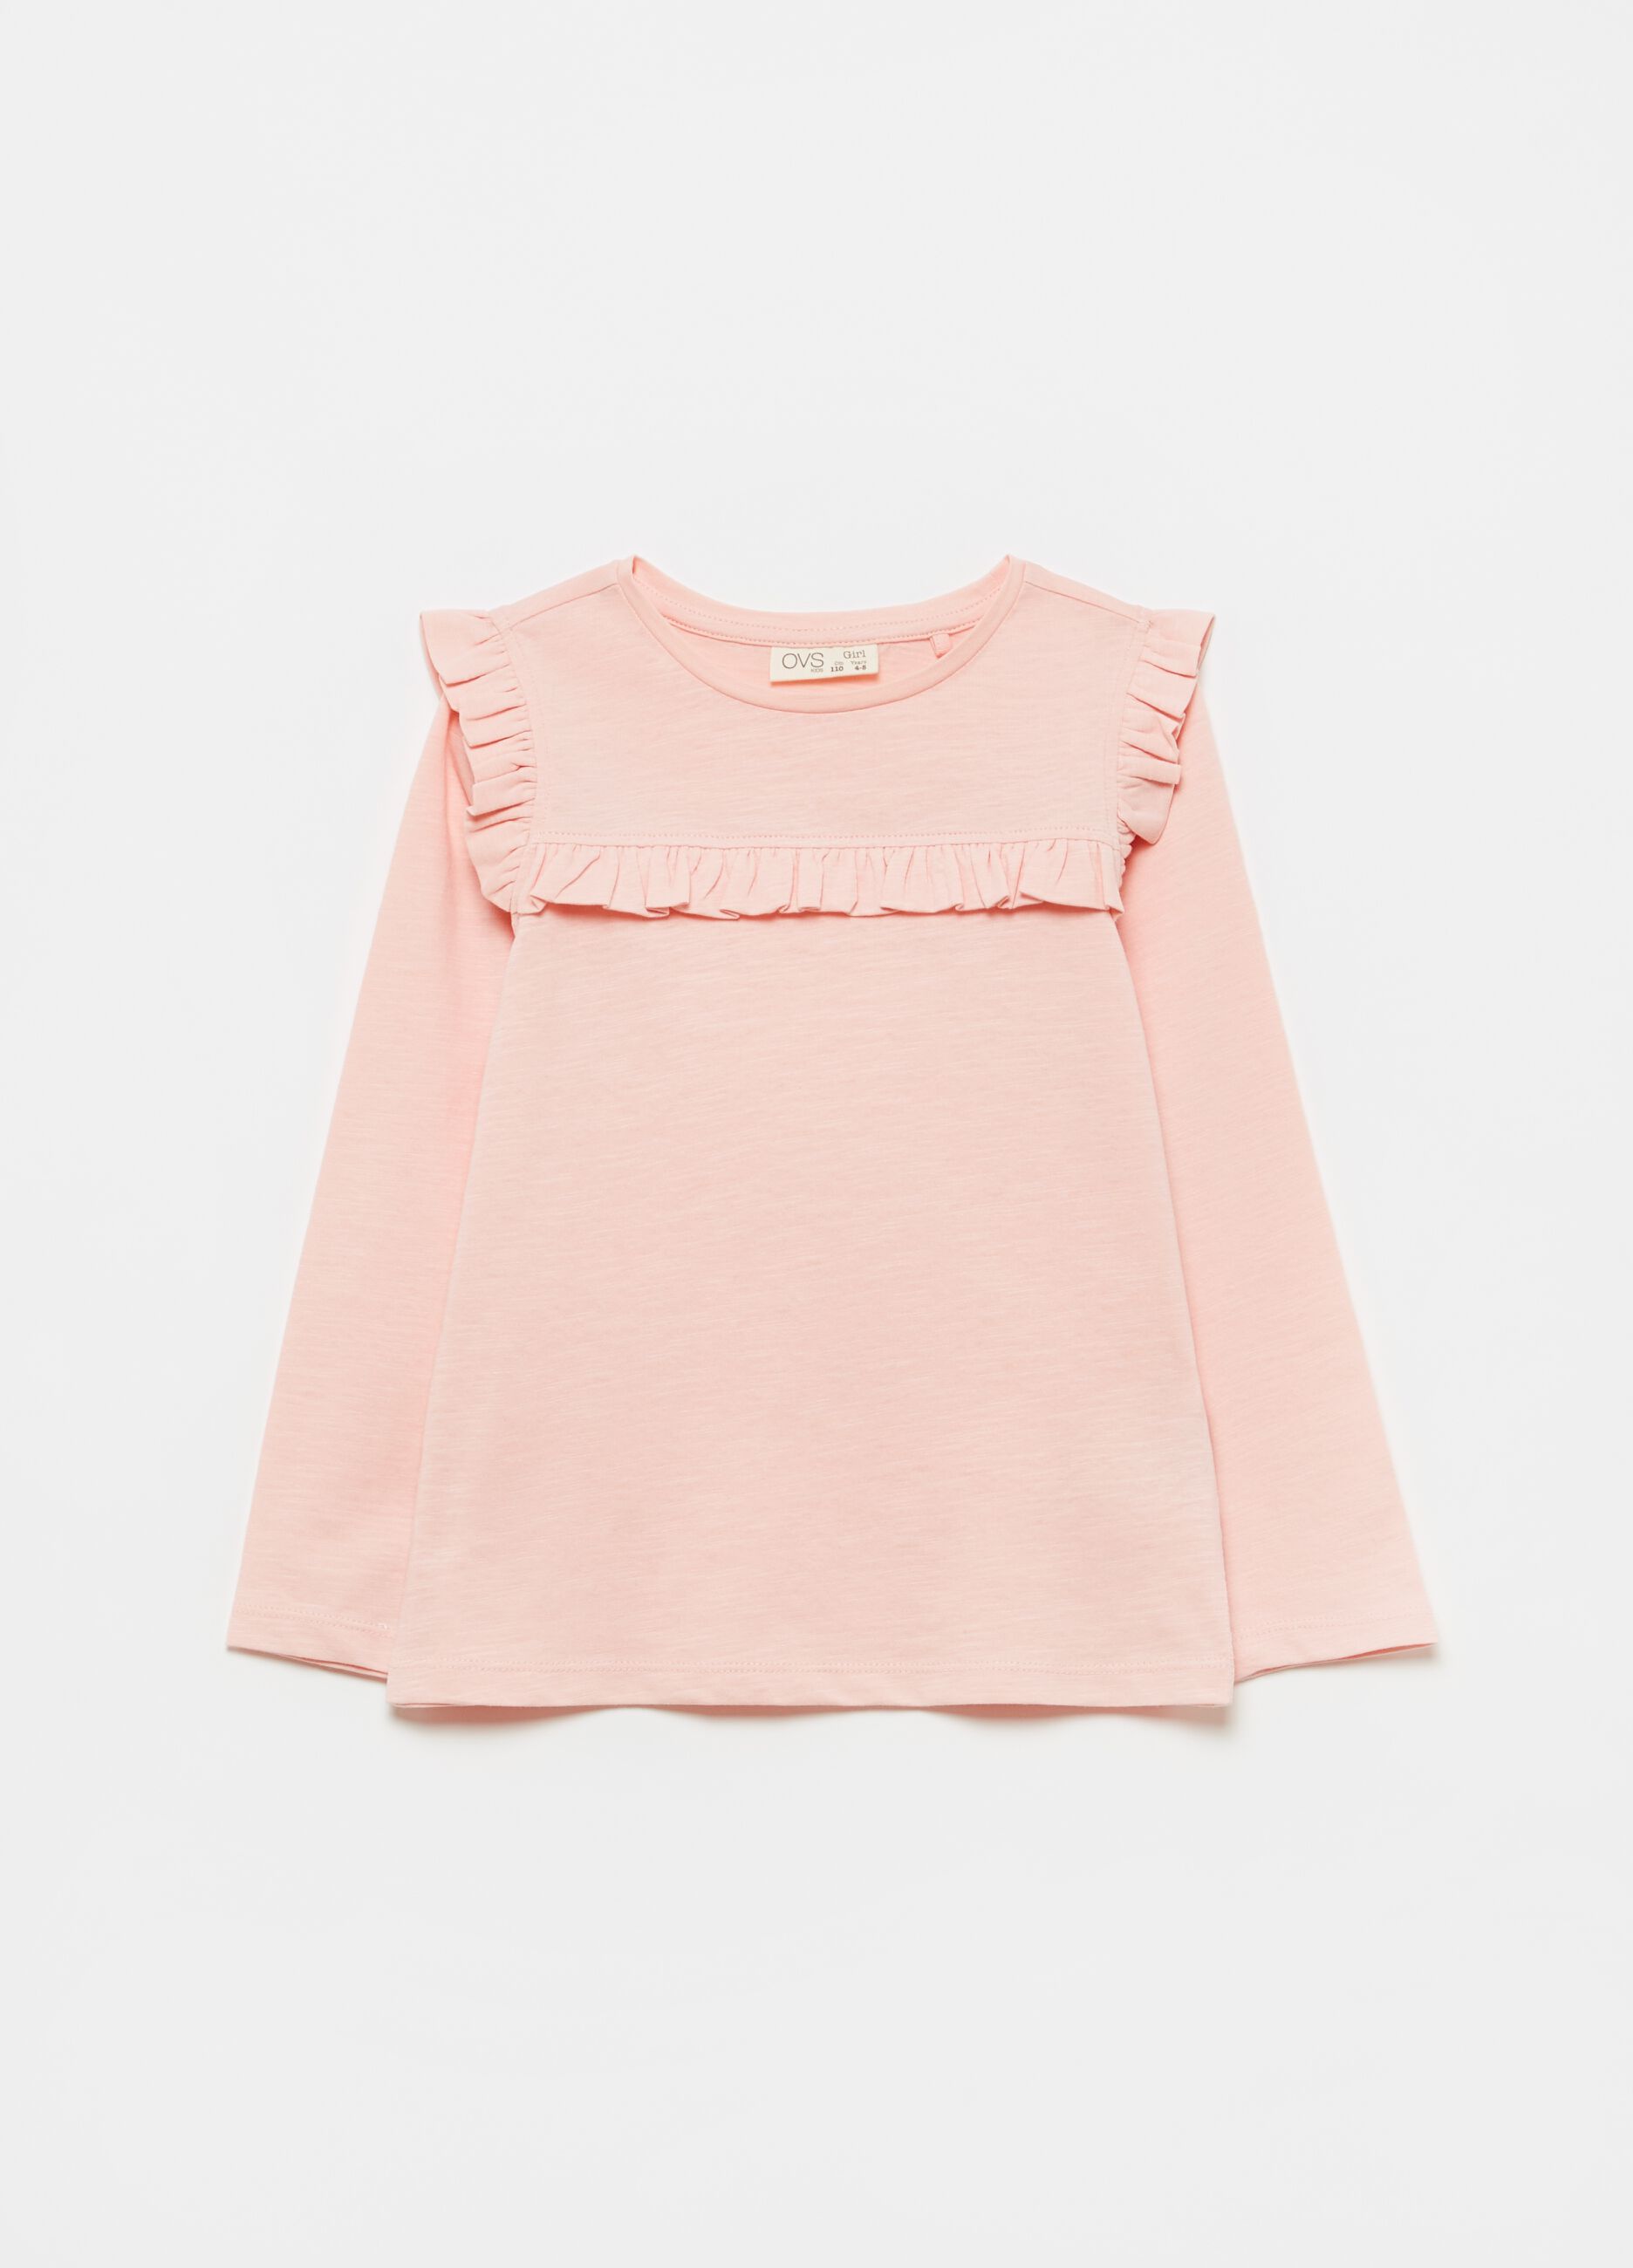 T-shirt in 100% cotton with frills